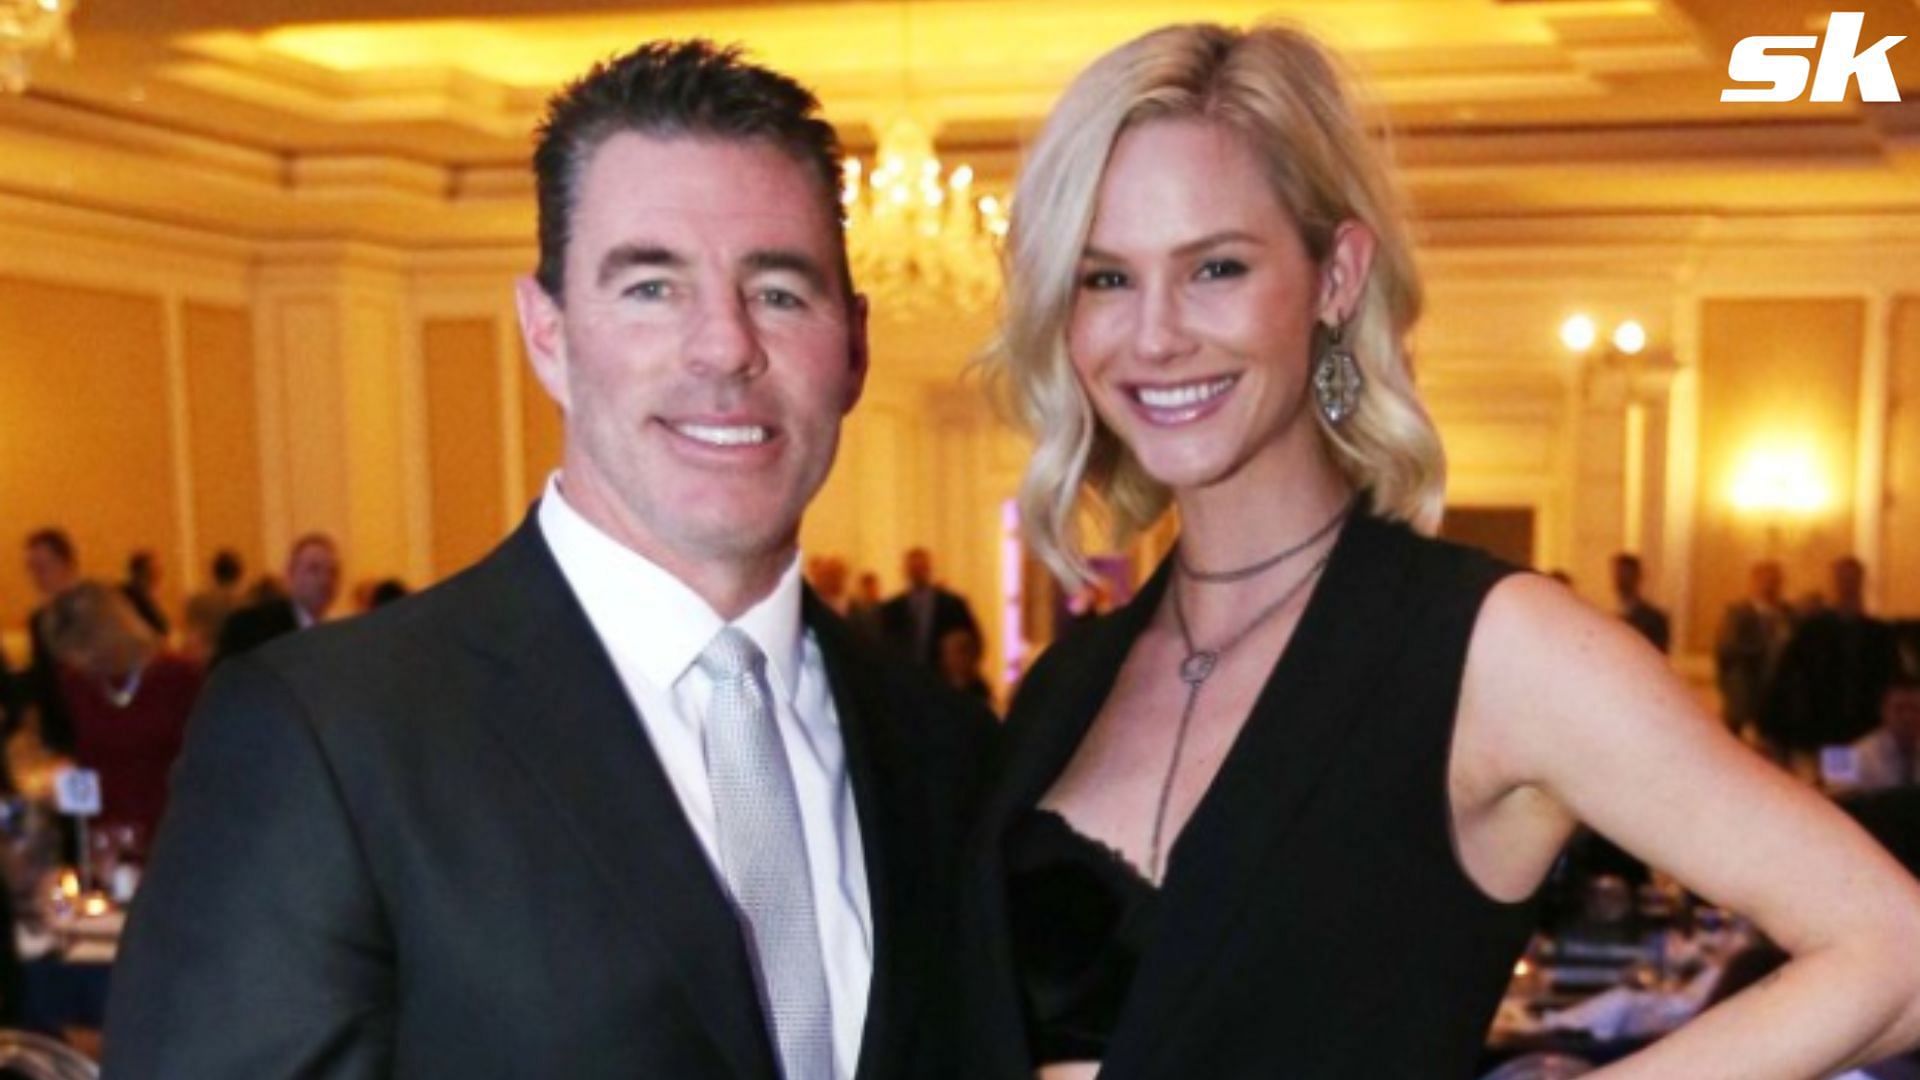 When MLB star Jim Edmonds' ex-wife was emotionally scarred when the news of  her divorce turned into a media circus